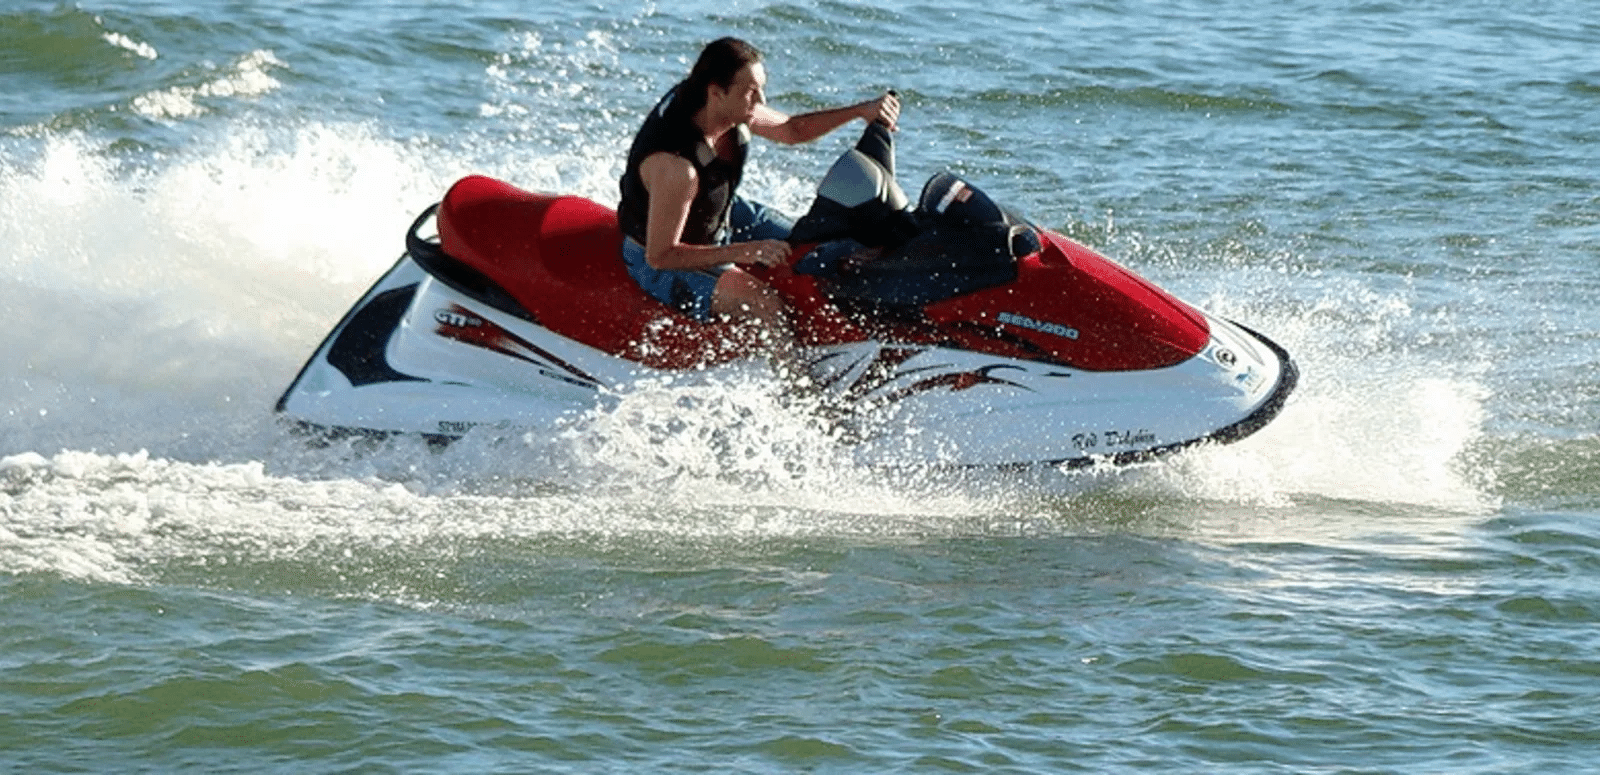 Water Sports at Kundle Beach